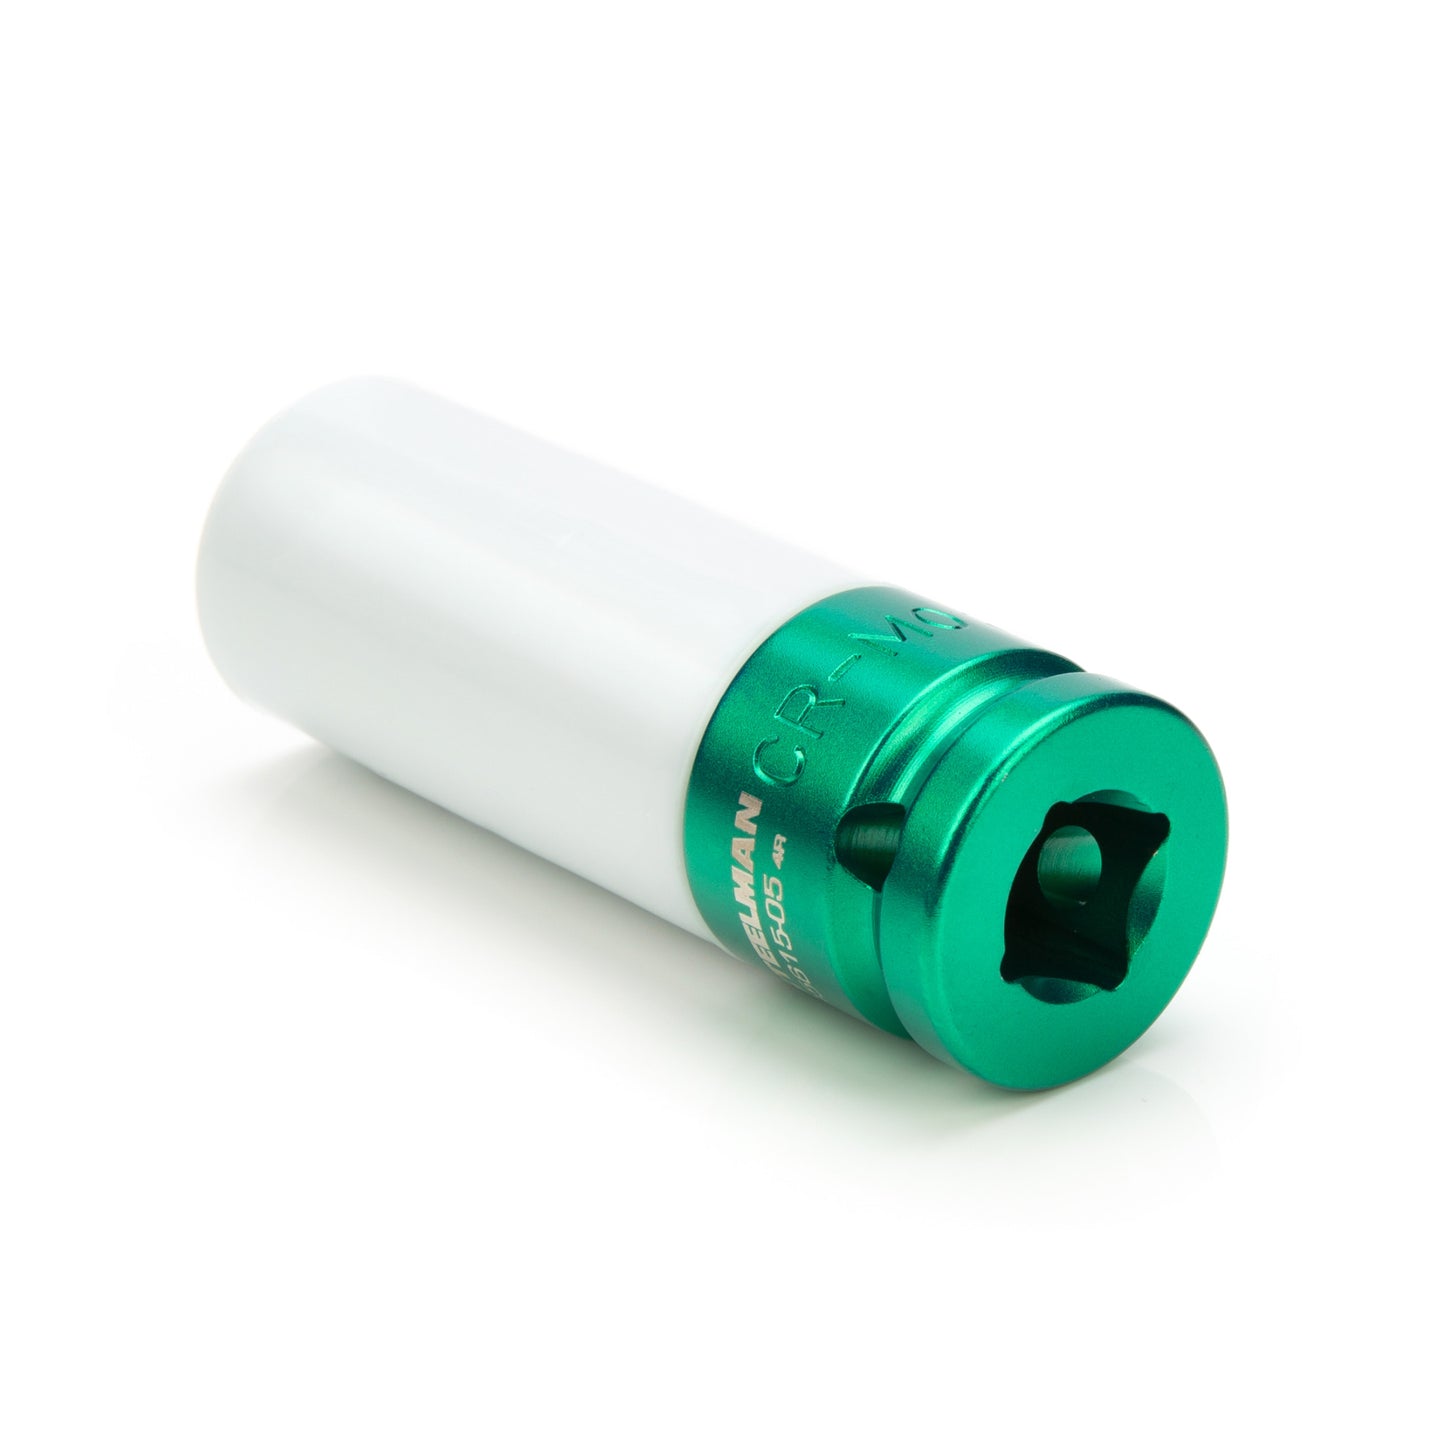 1/2-inch Drive 3/4-inch Sleeved Impact Socket - Green